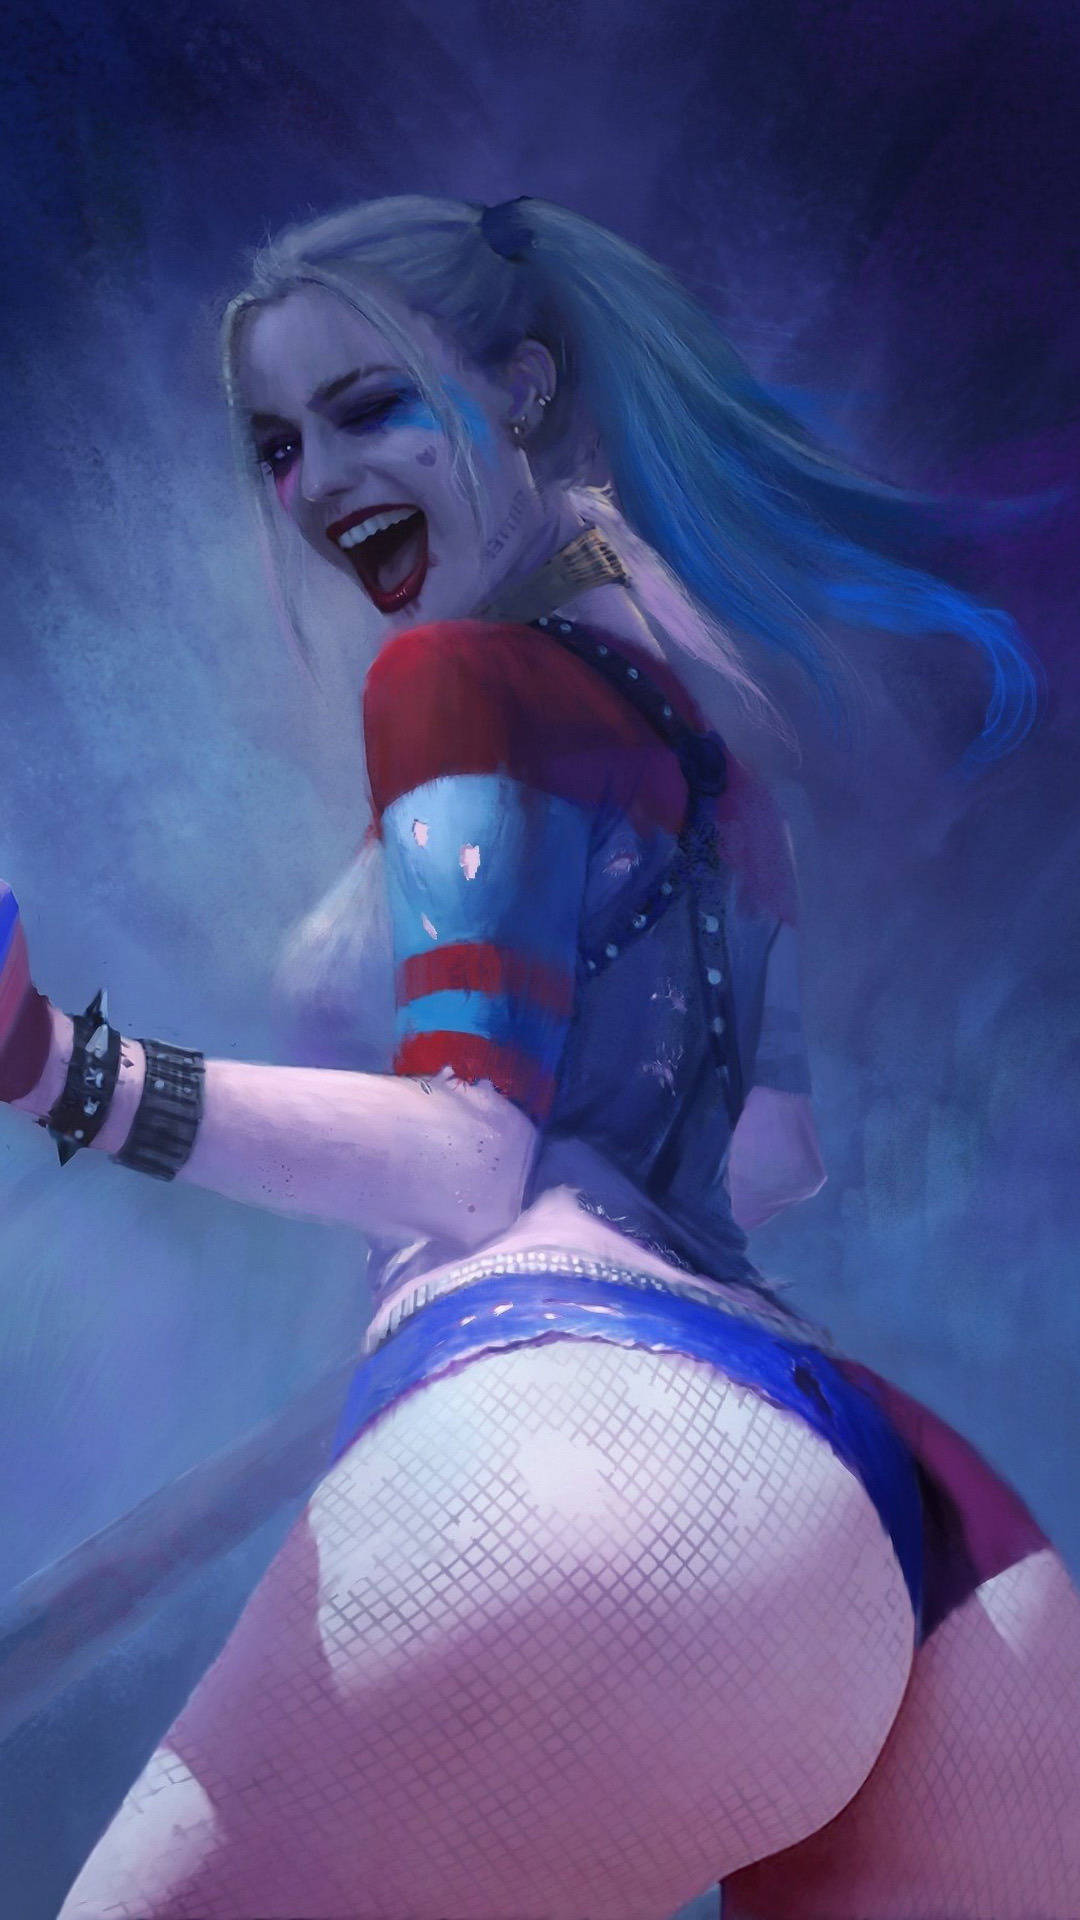 amy tait recommends hot harley quinn images pic